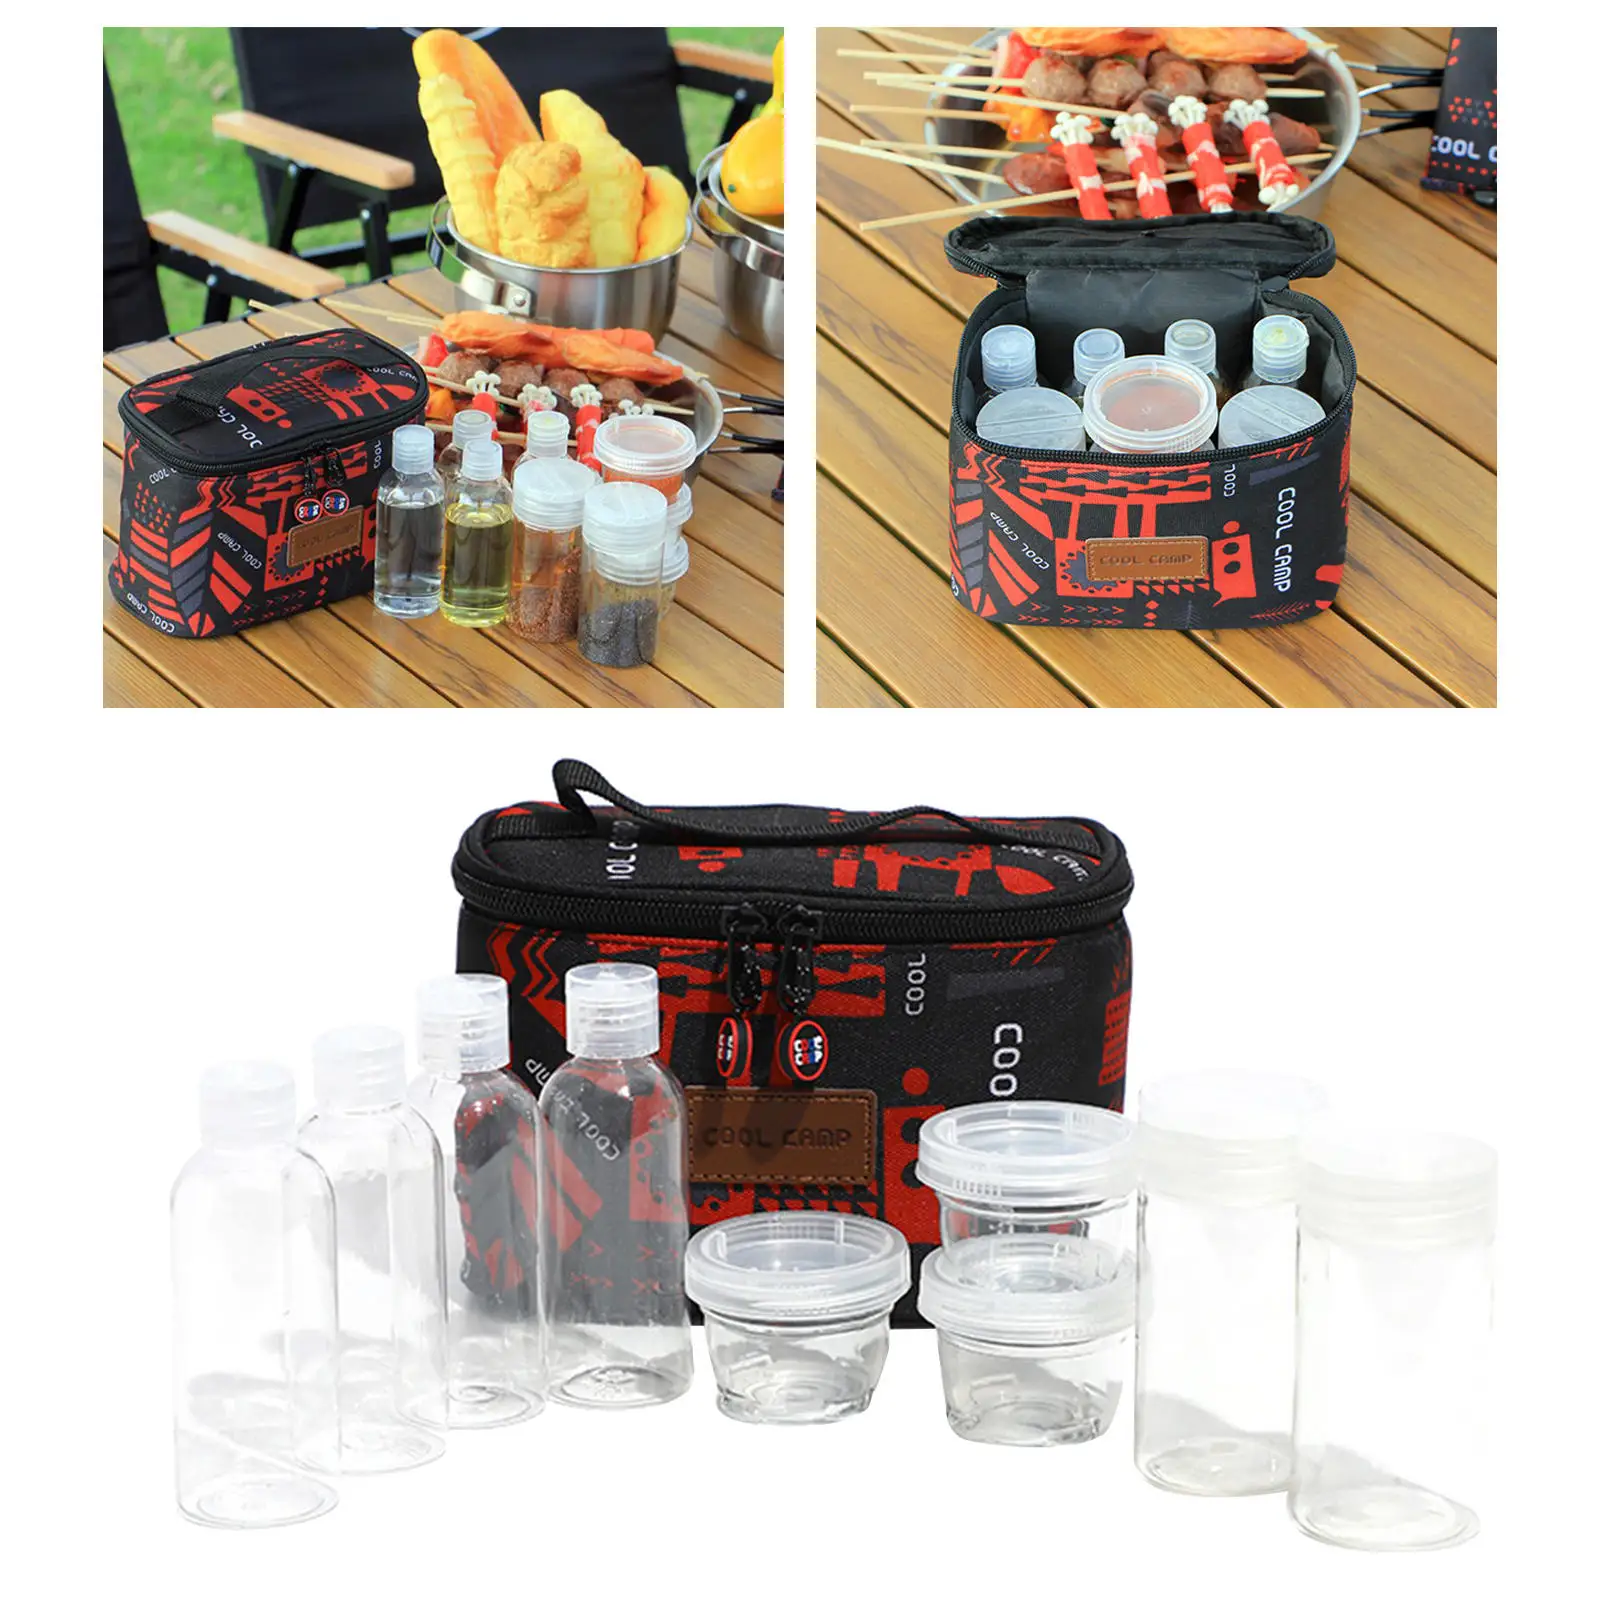 Spice Sauce Condiment Bottles Pepper Seasoning Pot For BBQ Camping Outdoor Salt Pepper Jar Herb Spice Container